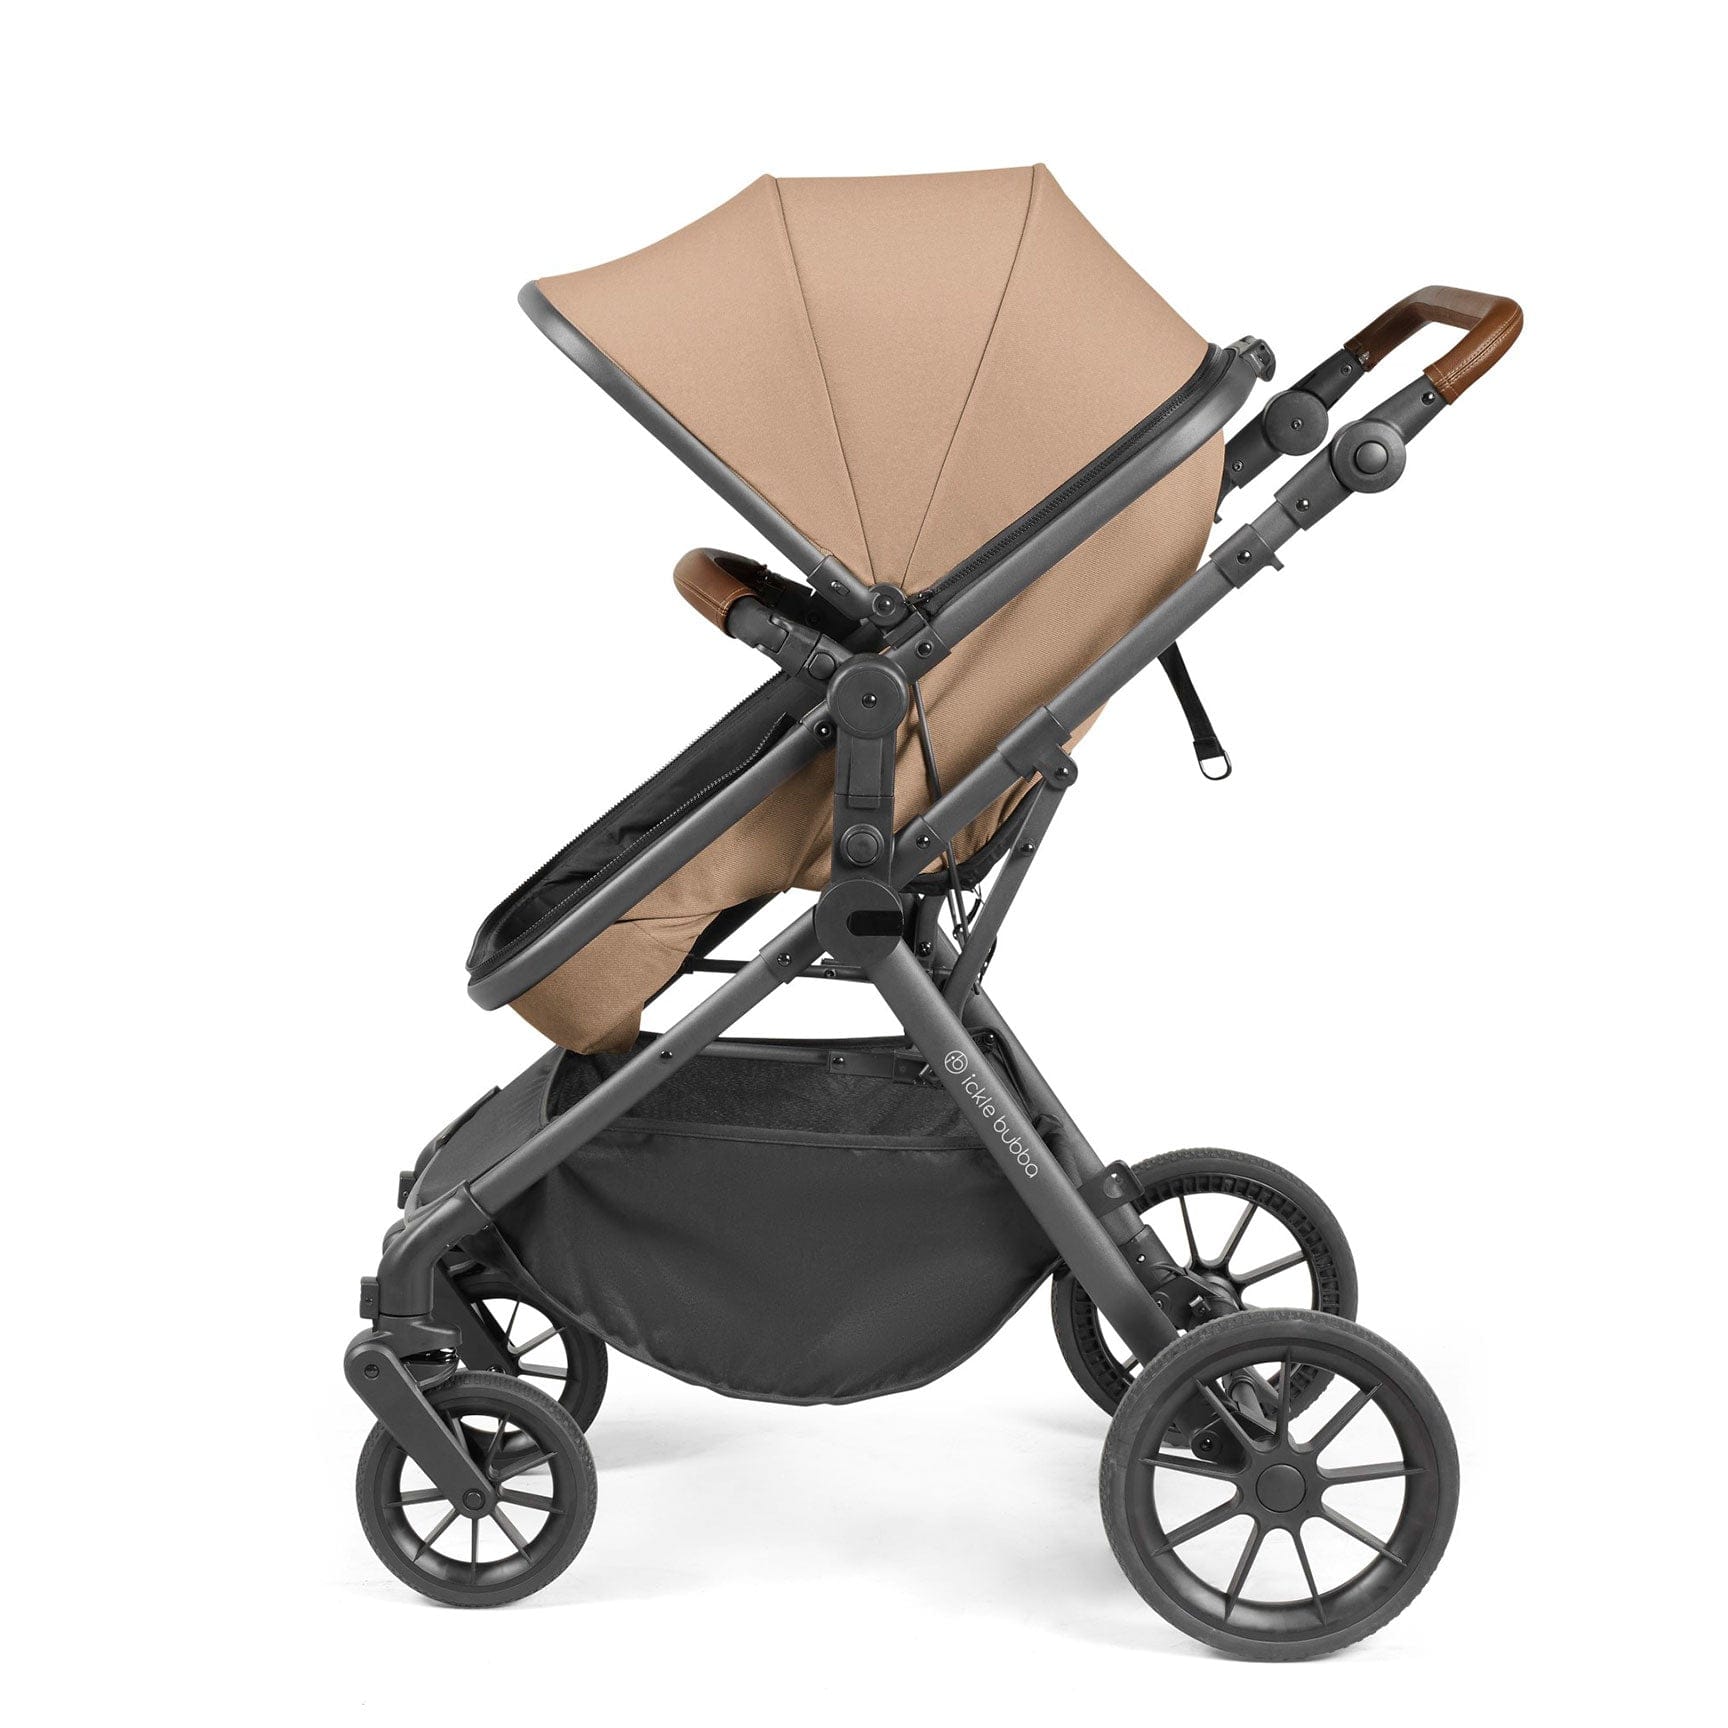 Ickle Bubba Ickle Bubba Cosmo 2 in 1 Plus Carrycot & Pushchair in Gun metal/Desert Travel Systems 10-007-001-136 5056515025637